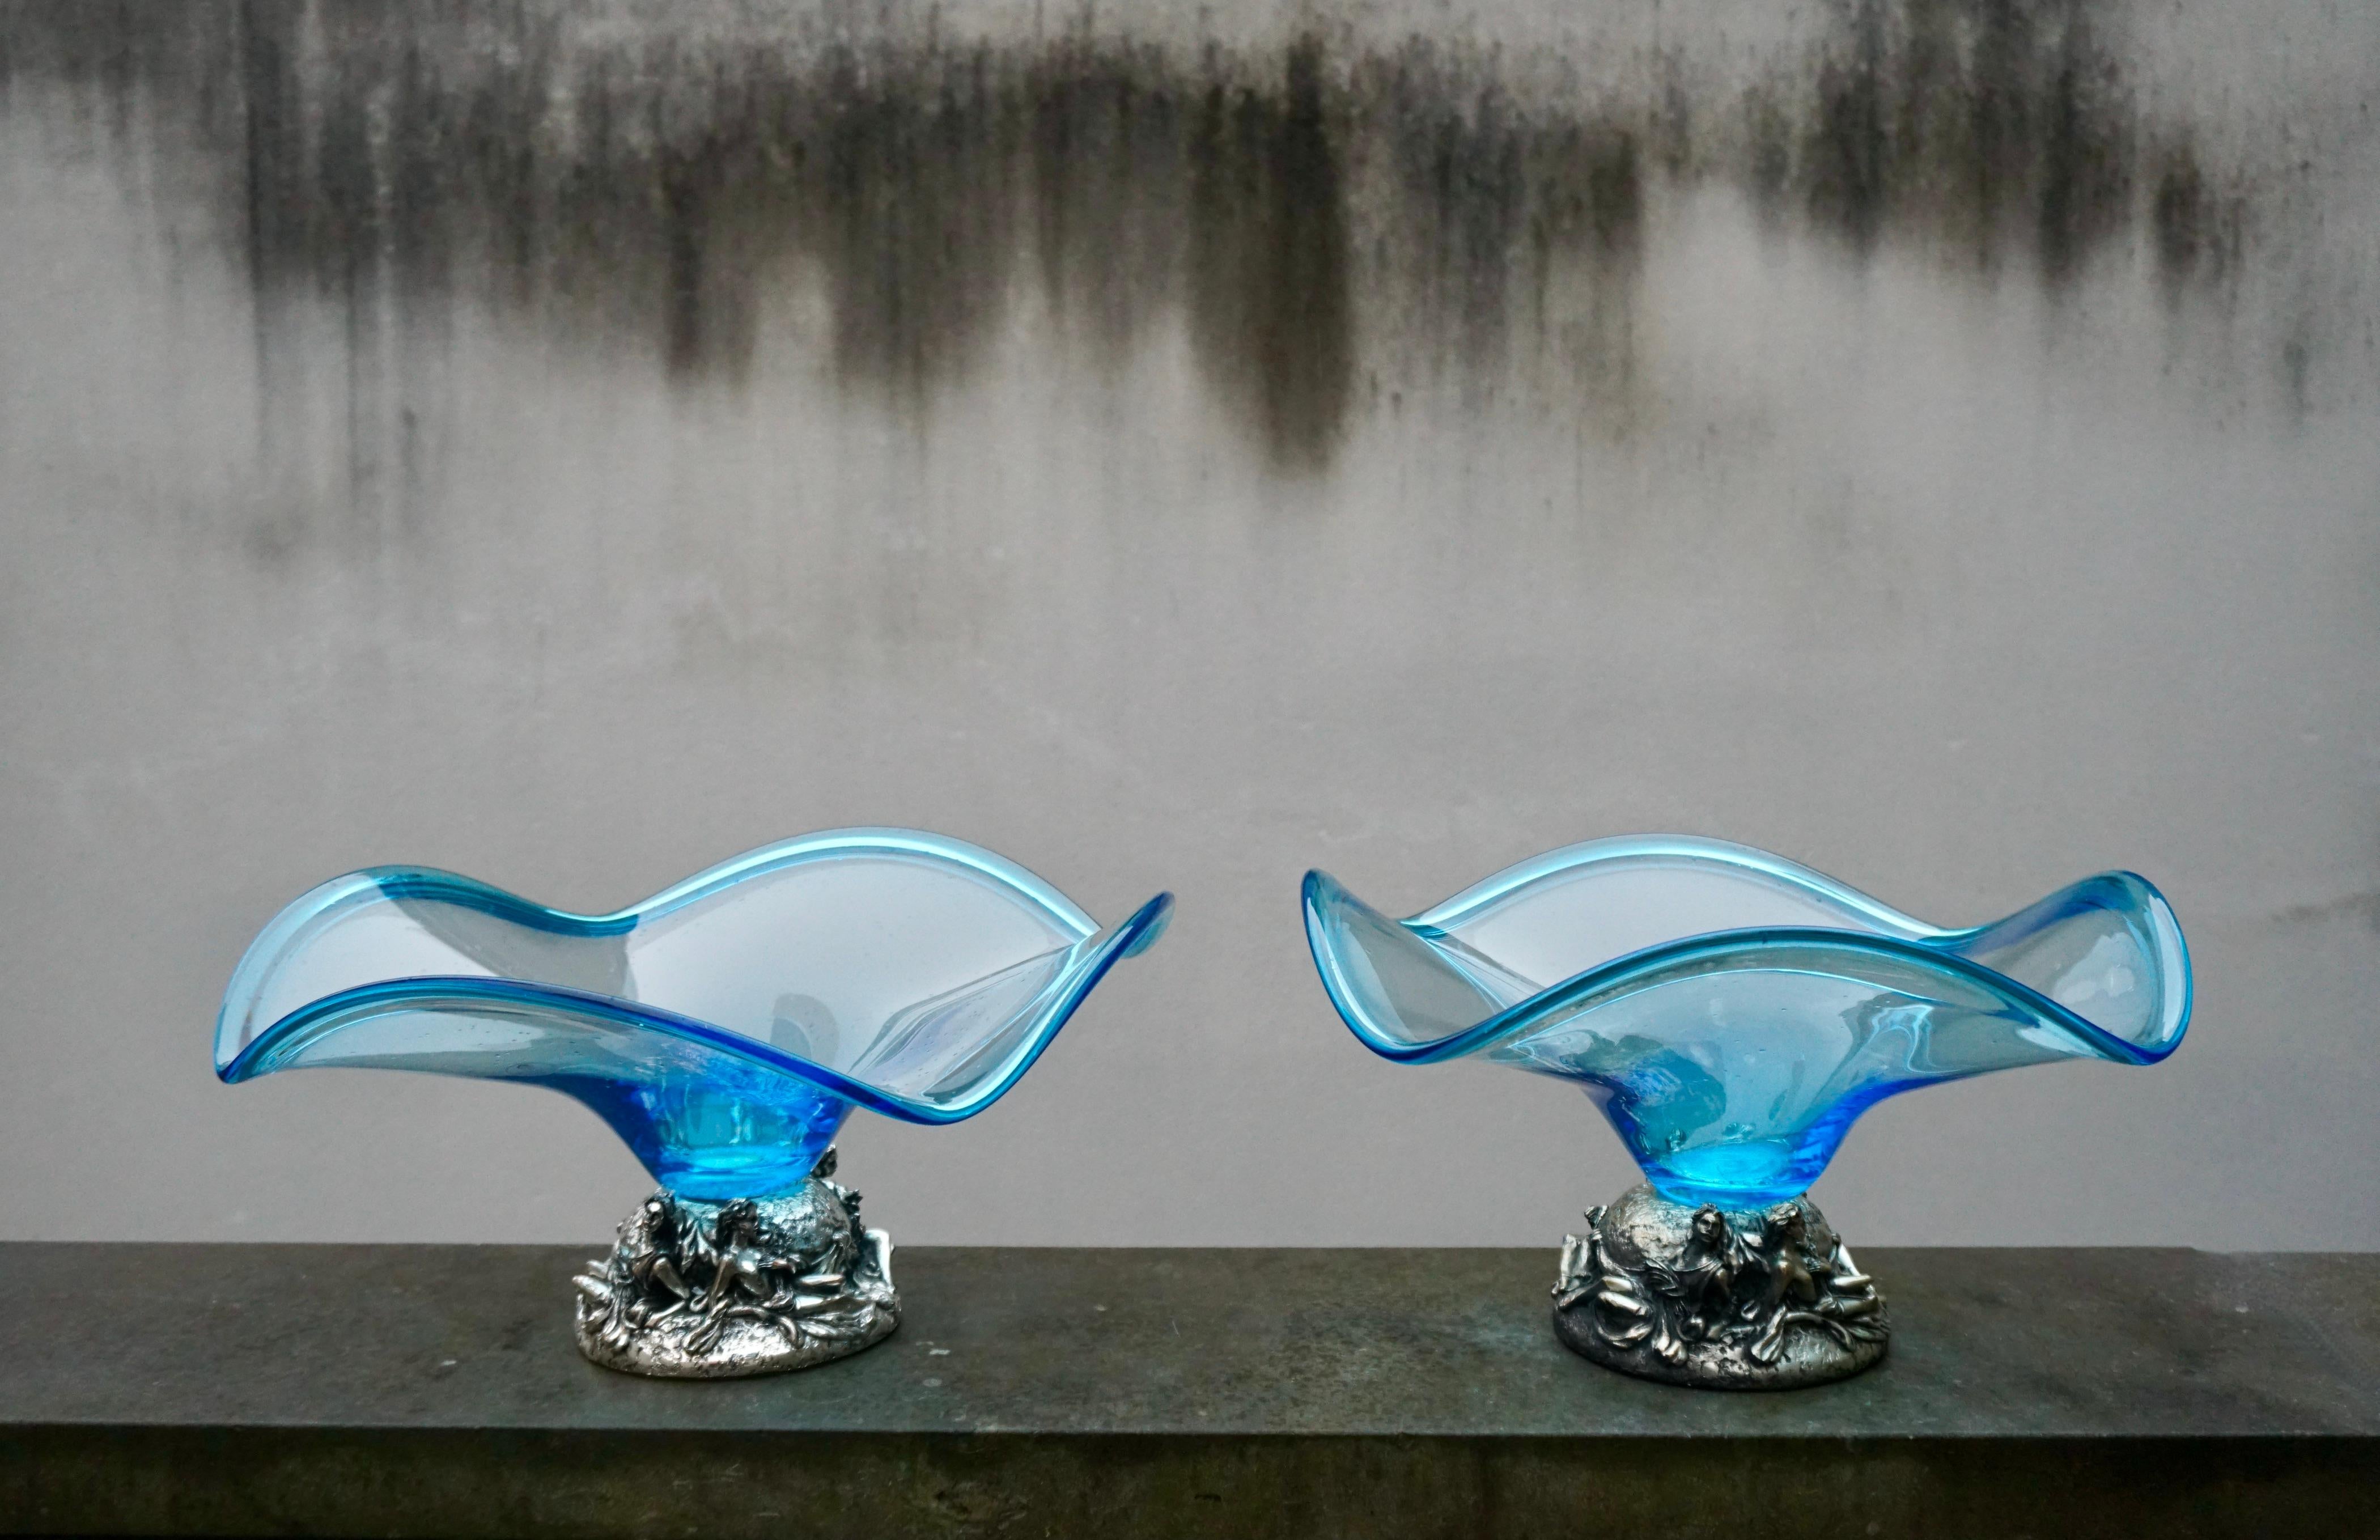 Pair of gorgeous rare Italian art glass bowl on a silver plated pedestal with the image of four woman. 

The bowl itself is made from blue, opalescent glass with a twist to it. The piece is in great condition. The silver base shines and the glass is